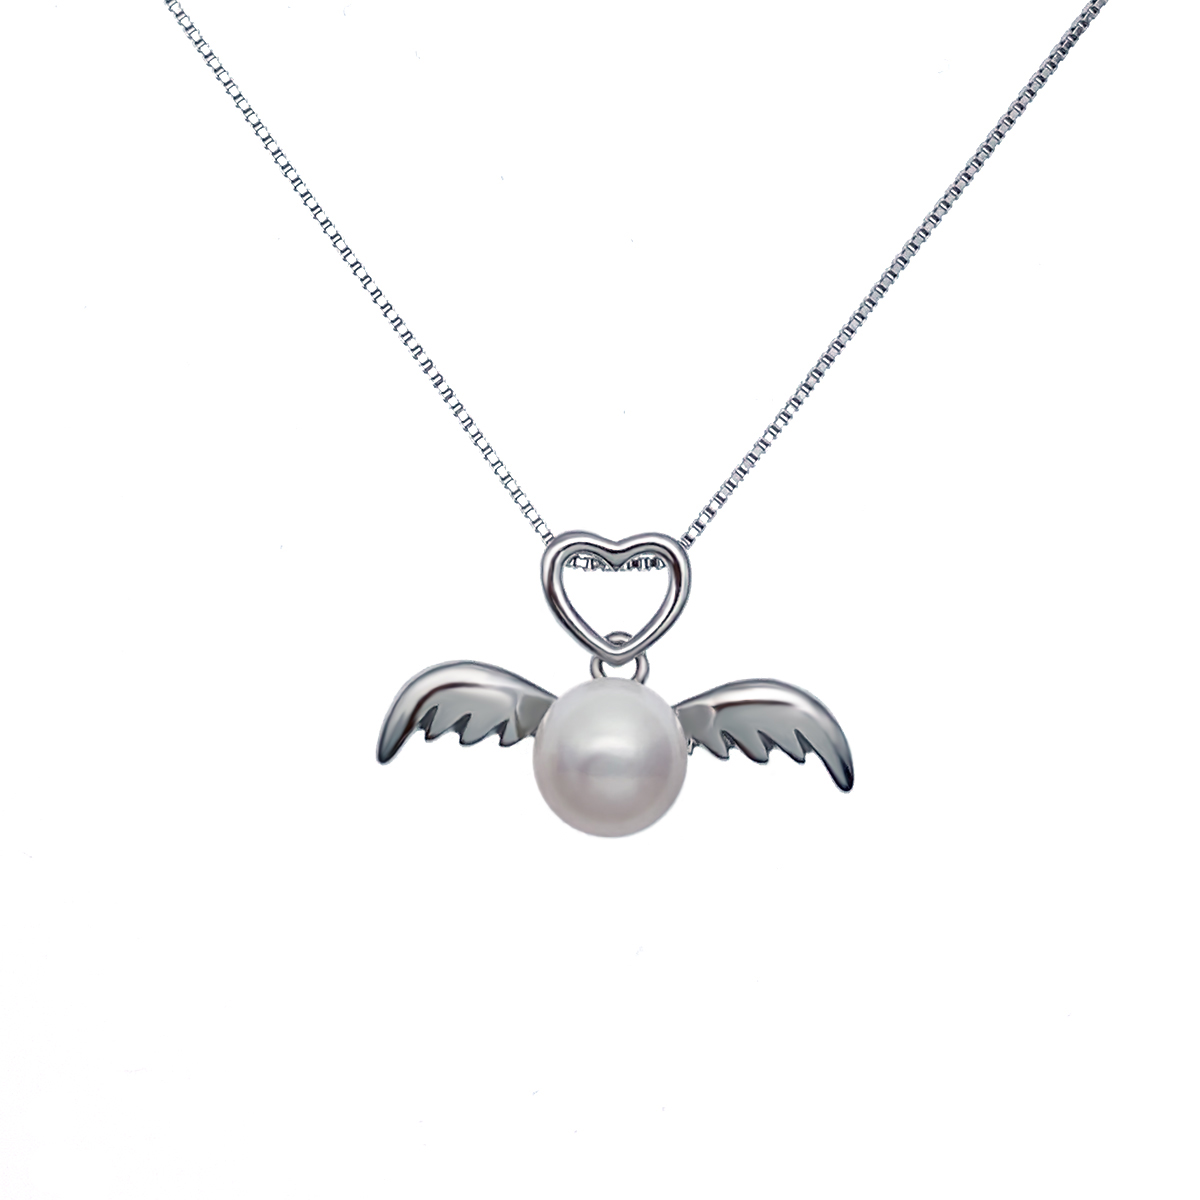 6-7mm Freshwater Pearl with 925 Silver Swing pendant